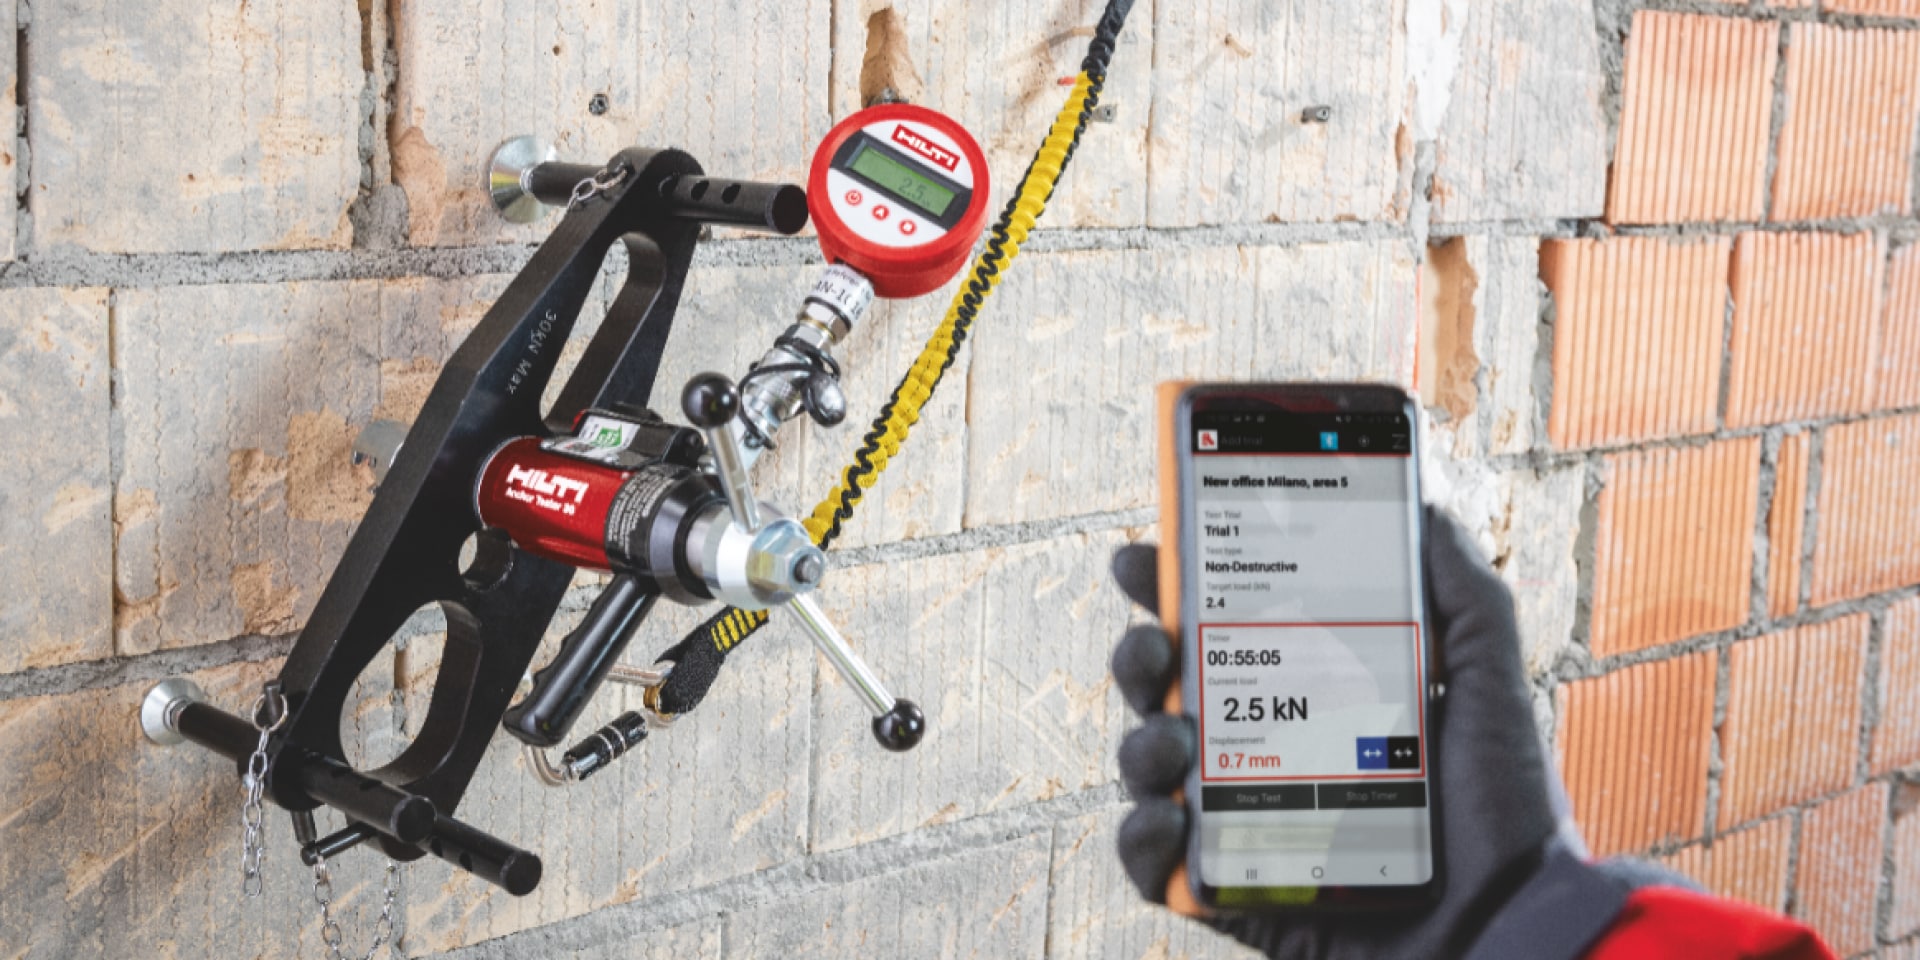 On-site masonry/concrete anchor testing equipment with wireless data transfer to a smartphone